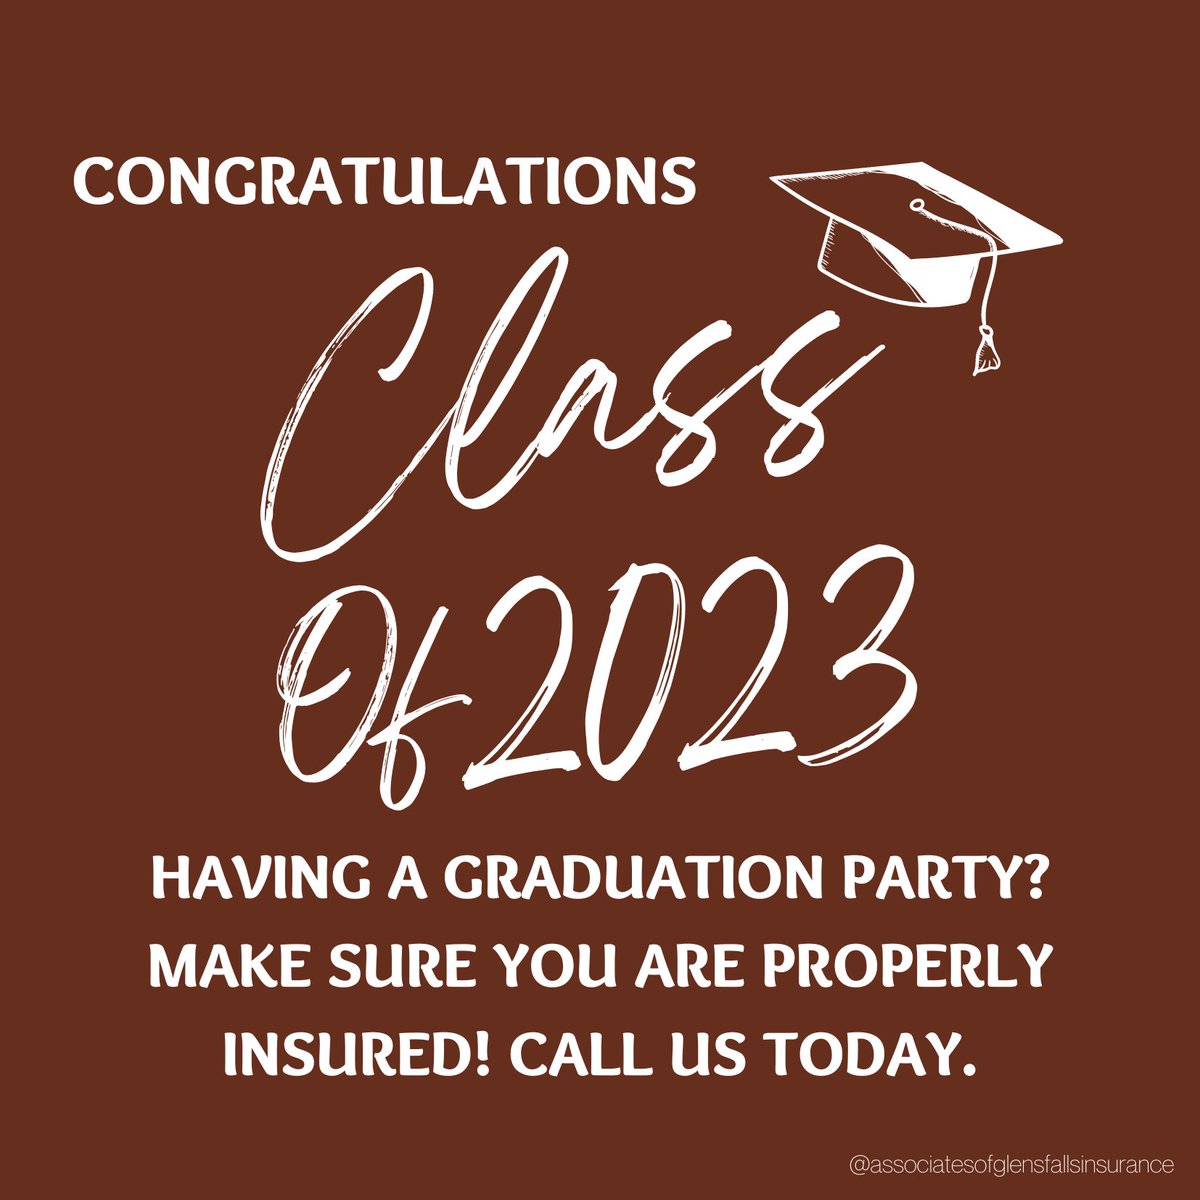 Congratulations 2023 graduates! As you celebrate this milestone with family and friends, don't forget to protect yourself and your guests with graduation party insurance. Let us help you ensure a memorable and worry-free event 🎓🎉#GraduationParty #InsuranceProtection #Celebrate